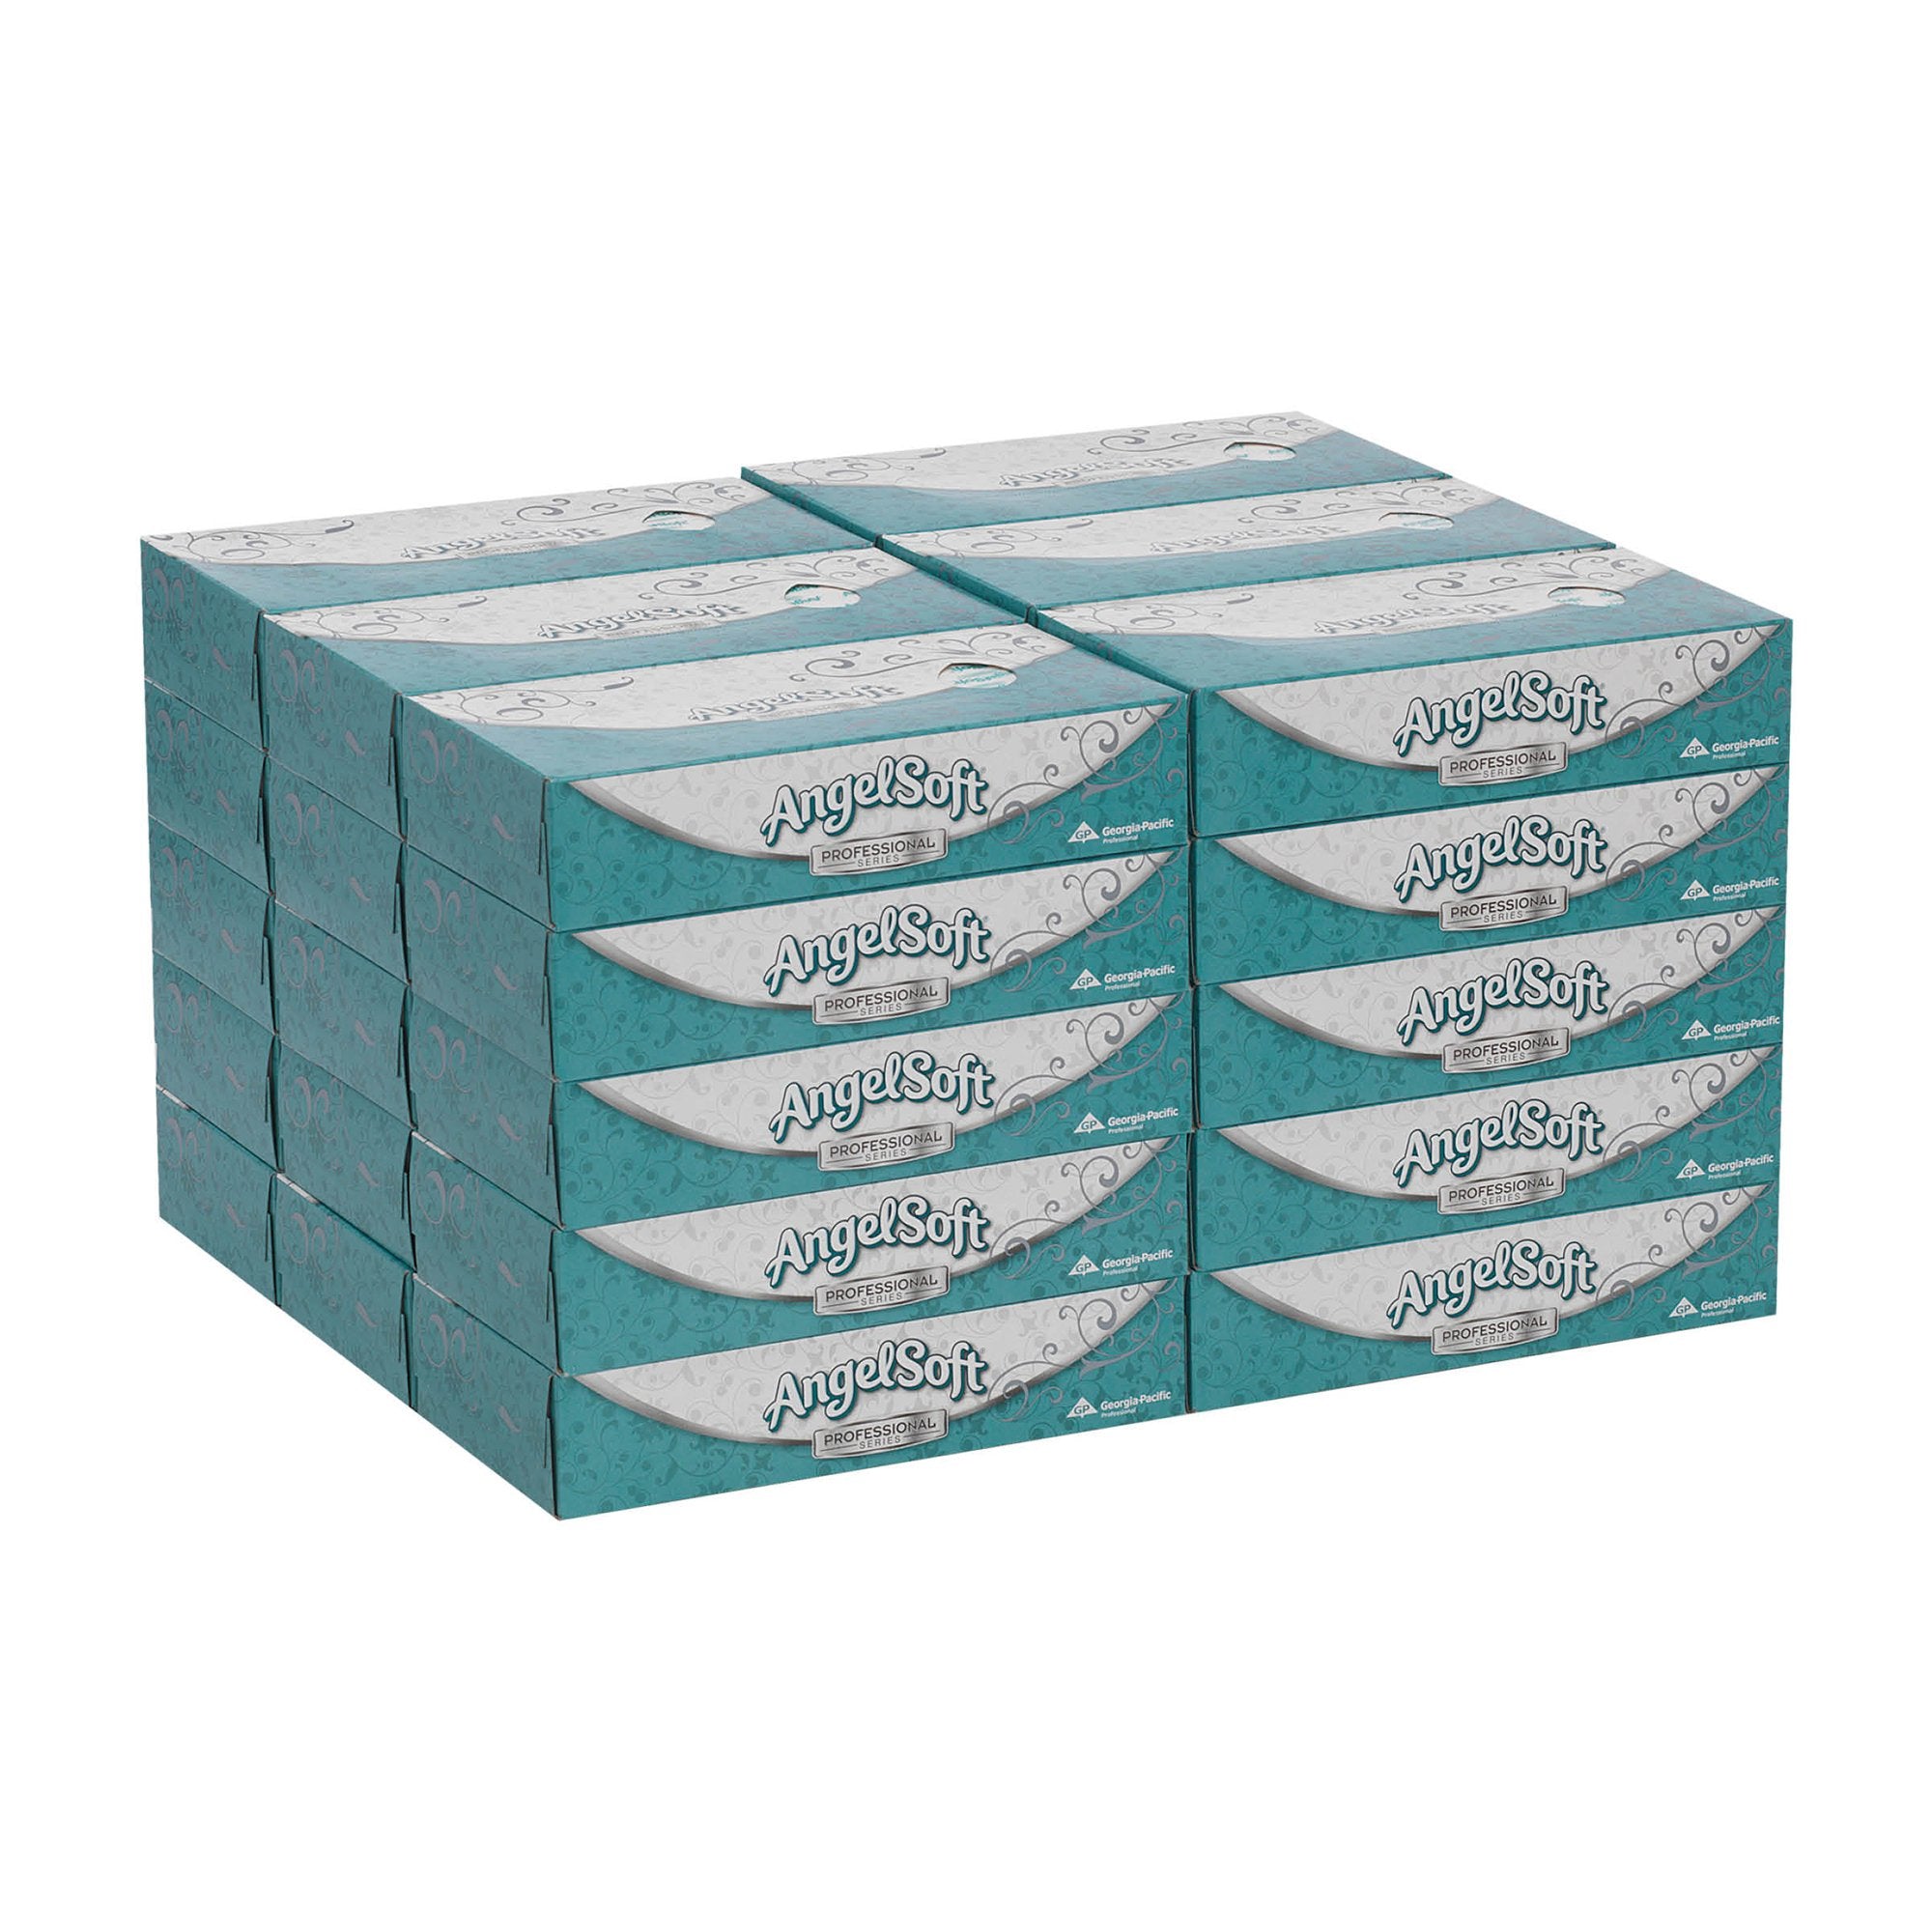 Angel Soft Professional Series® Facial Tissue White 7-3/5 X 8-4/5 Inch 100 Count